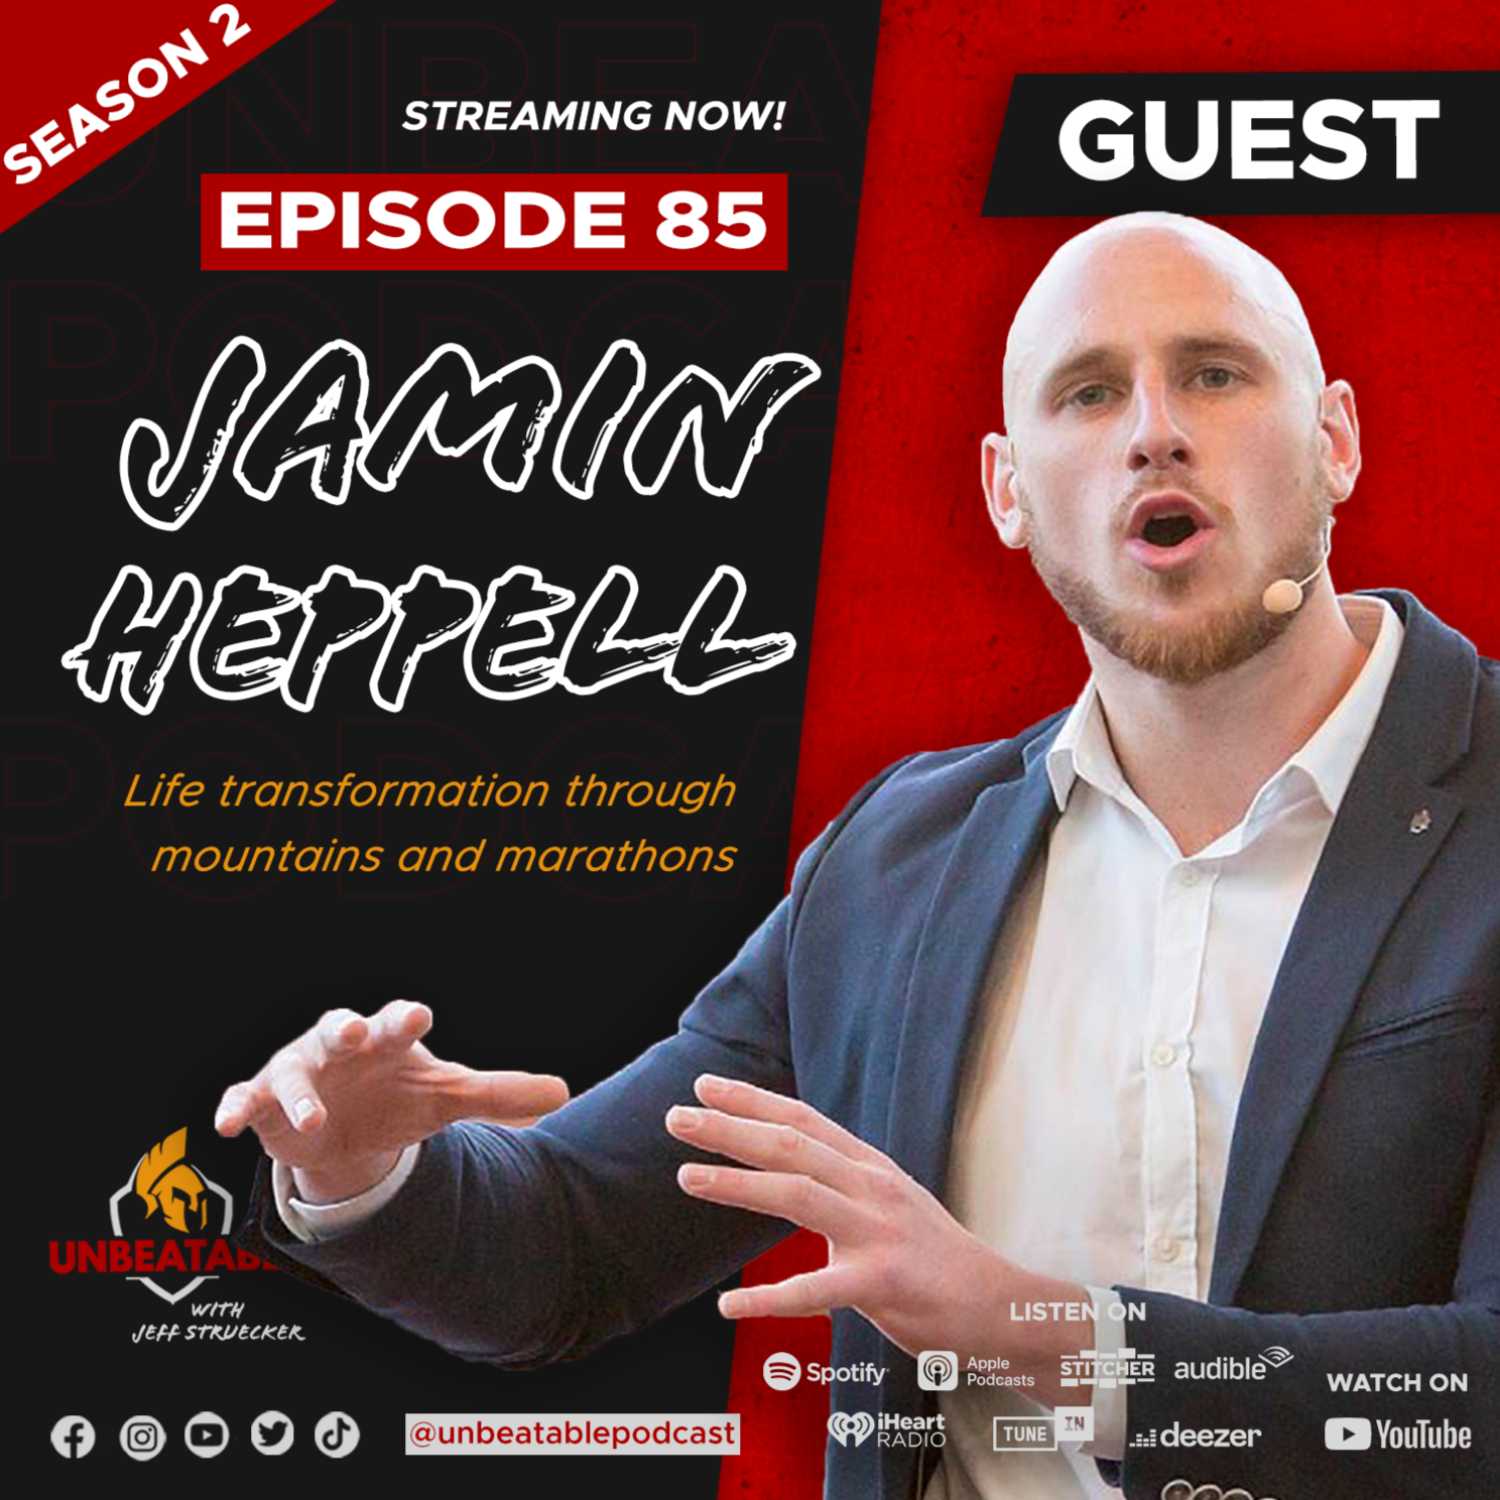 EP. 85 Jamin Heppell: Life transformation through mountains and marathons